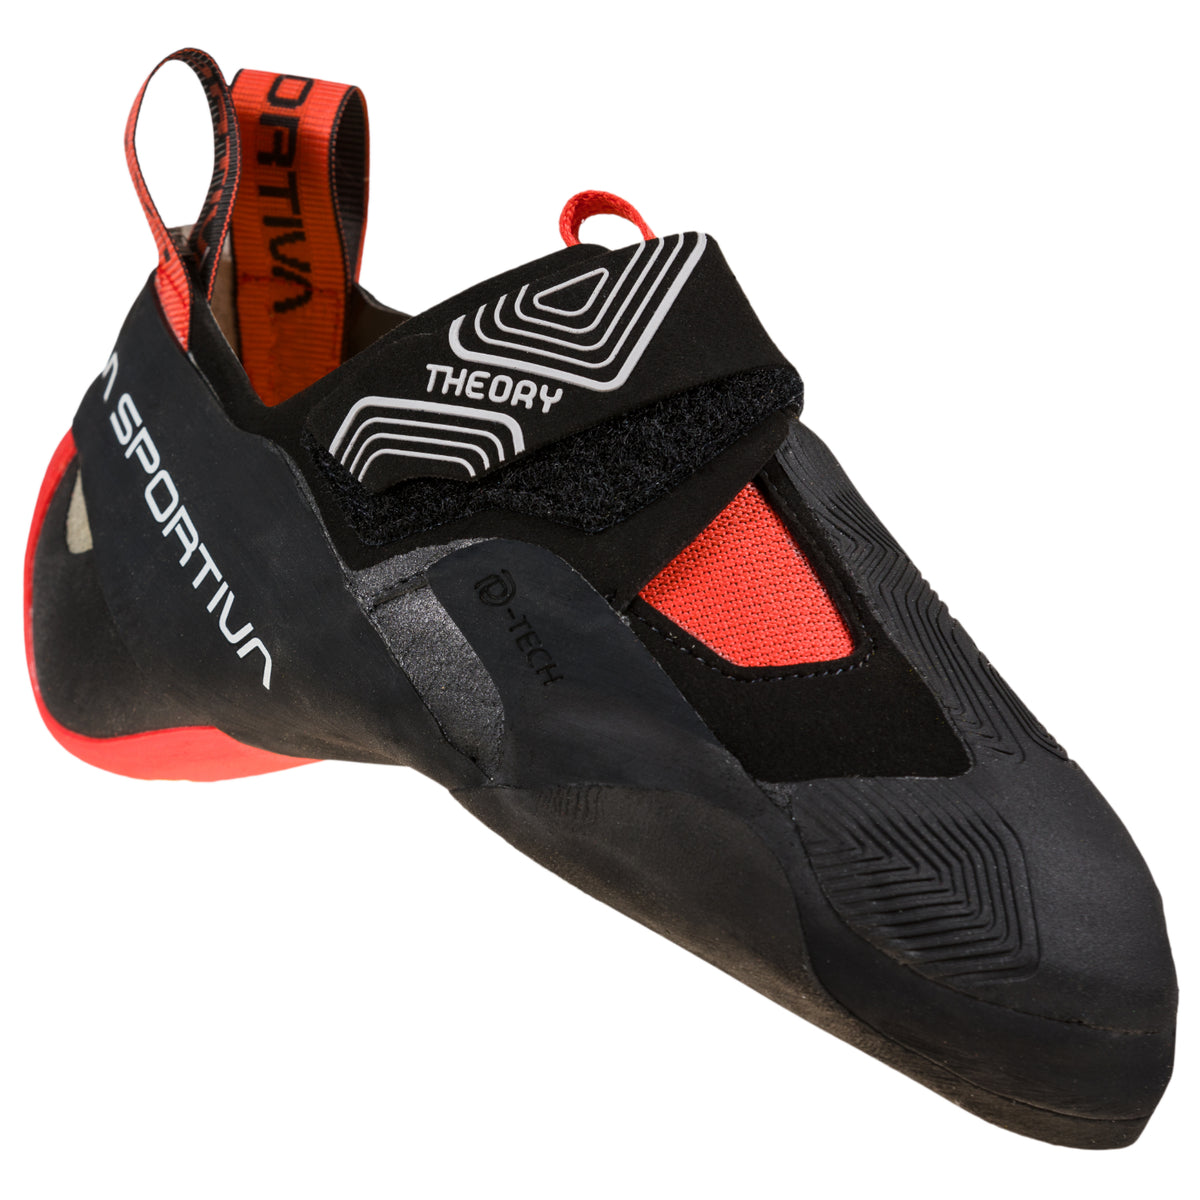 La Sportiva Theory Womens in black and red showing side profile